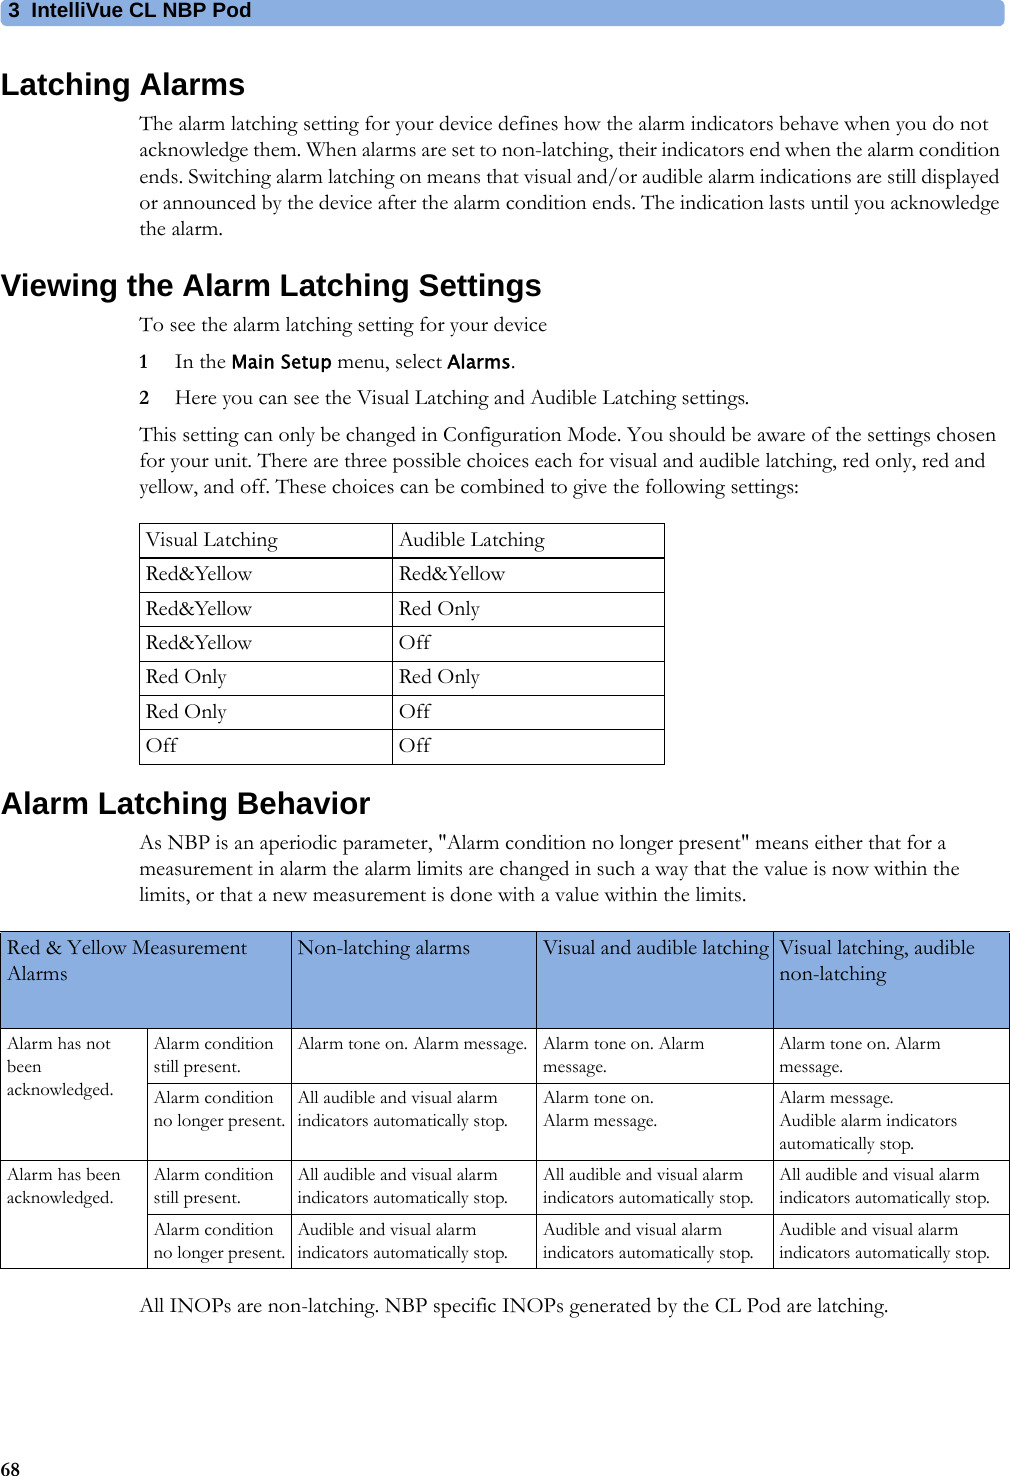 3 IntelliVue CL NBP Pod68Latching AlarmsThe alarm latching setting for your device defines how the alarm indicators behave when you do not acknowledge them. When alarms are set to non-latching, their indicators end when the alarm condition ends. Switching alarm latching on means that visual and/or audible alarm indications are still displayed or announced by the device after the alarm condition ends. The indication lasts until you acknowledge the alarm.Viewing the Alarm Latching SettingsTo see the alarm latching setting for your device1In the Main Setup menu, select Alarms.2Here you can see the Visual Latching and Audible Latching settings.This setting can only be changed in Configuration Mode. You should be aware of the settings chosen for your unit. There are three possible choices each for visual and audible latching, red only, red and yellow, and off. These choices can be combined to give the following settings:Alarm Latching BehaviorAs NBP is an aperiodic parameter, &quot;Alarm condition no longer present&quot; means either that for a measurement in alarm the alarm limits are changed in such a way that the value is now within the limits, or that a new measurement is done with a value within the limits.All INOPs are non-latching. NBP specific INOPs generated by the CL Pod are latching.Visual Latching Audible LatchingRed&amp;Yellow Red&amp;YellowRed&amp;Yellow Red OnlyRed&amp;Yellow OffRed Only Red OnlyRed Only OffOff OffRed &amp; Yellow Measurement AlarmsNon-latching alarms Visual and audible latching Visual latching, audible non-latchingAlarm has not been acknowledged.Alarm condition still present.Alarm tone on. Alarm message. Alarm tone on. Alarm message.Alarm tone on. Alarm message.Alarm condition no longer present.All audible and visual alarm indicators automatically stop.Alarm tone on.Alarm message. Alarm message.Audible alarm indicators automatically stop.Alarm has been acknowledged.Alarm condition still present.All audible and visual alarm indicators automatically stop.All audible and visual alarm indicators automatically stop.All audible and visual alarm indicators automatically stop.Alarm condition no longer present.Audible and visual alarm indicators automatically stop.Audible and visual alarm indicators automatically stop.Audible and visual alarm indicators automatically stop.